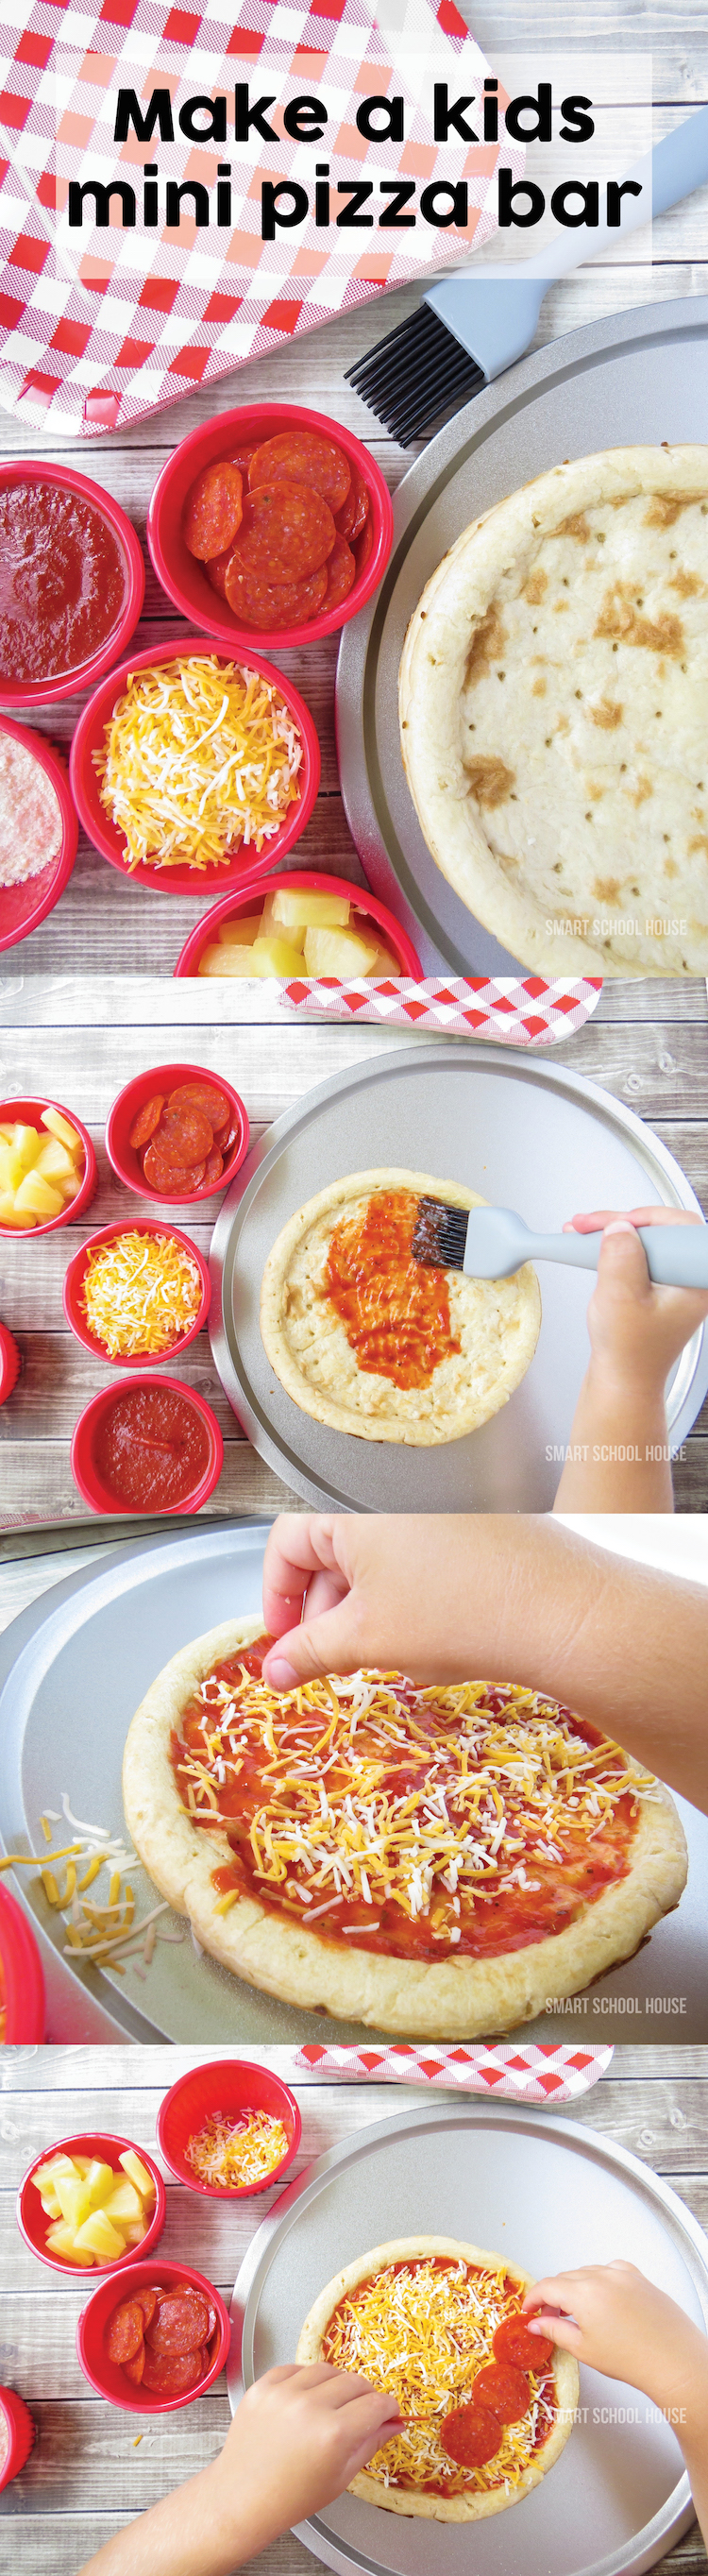 Make a kids pizza bar! Include mini pizzas, small cups of various toppings, and a brush to "paint" on the pizza sauce (it keeps things cleaner).